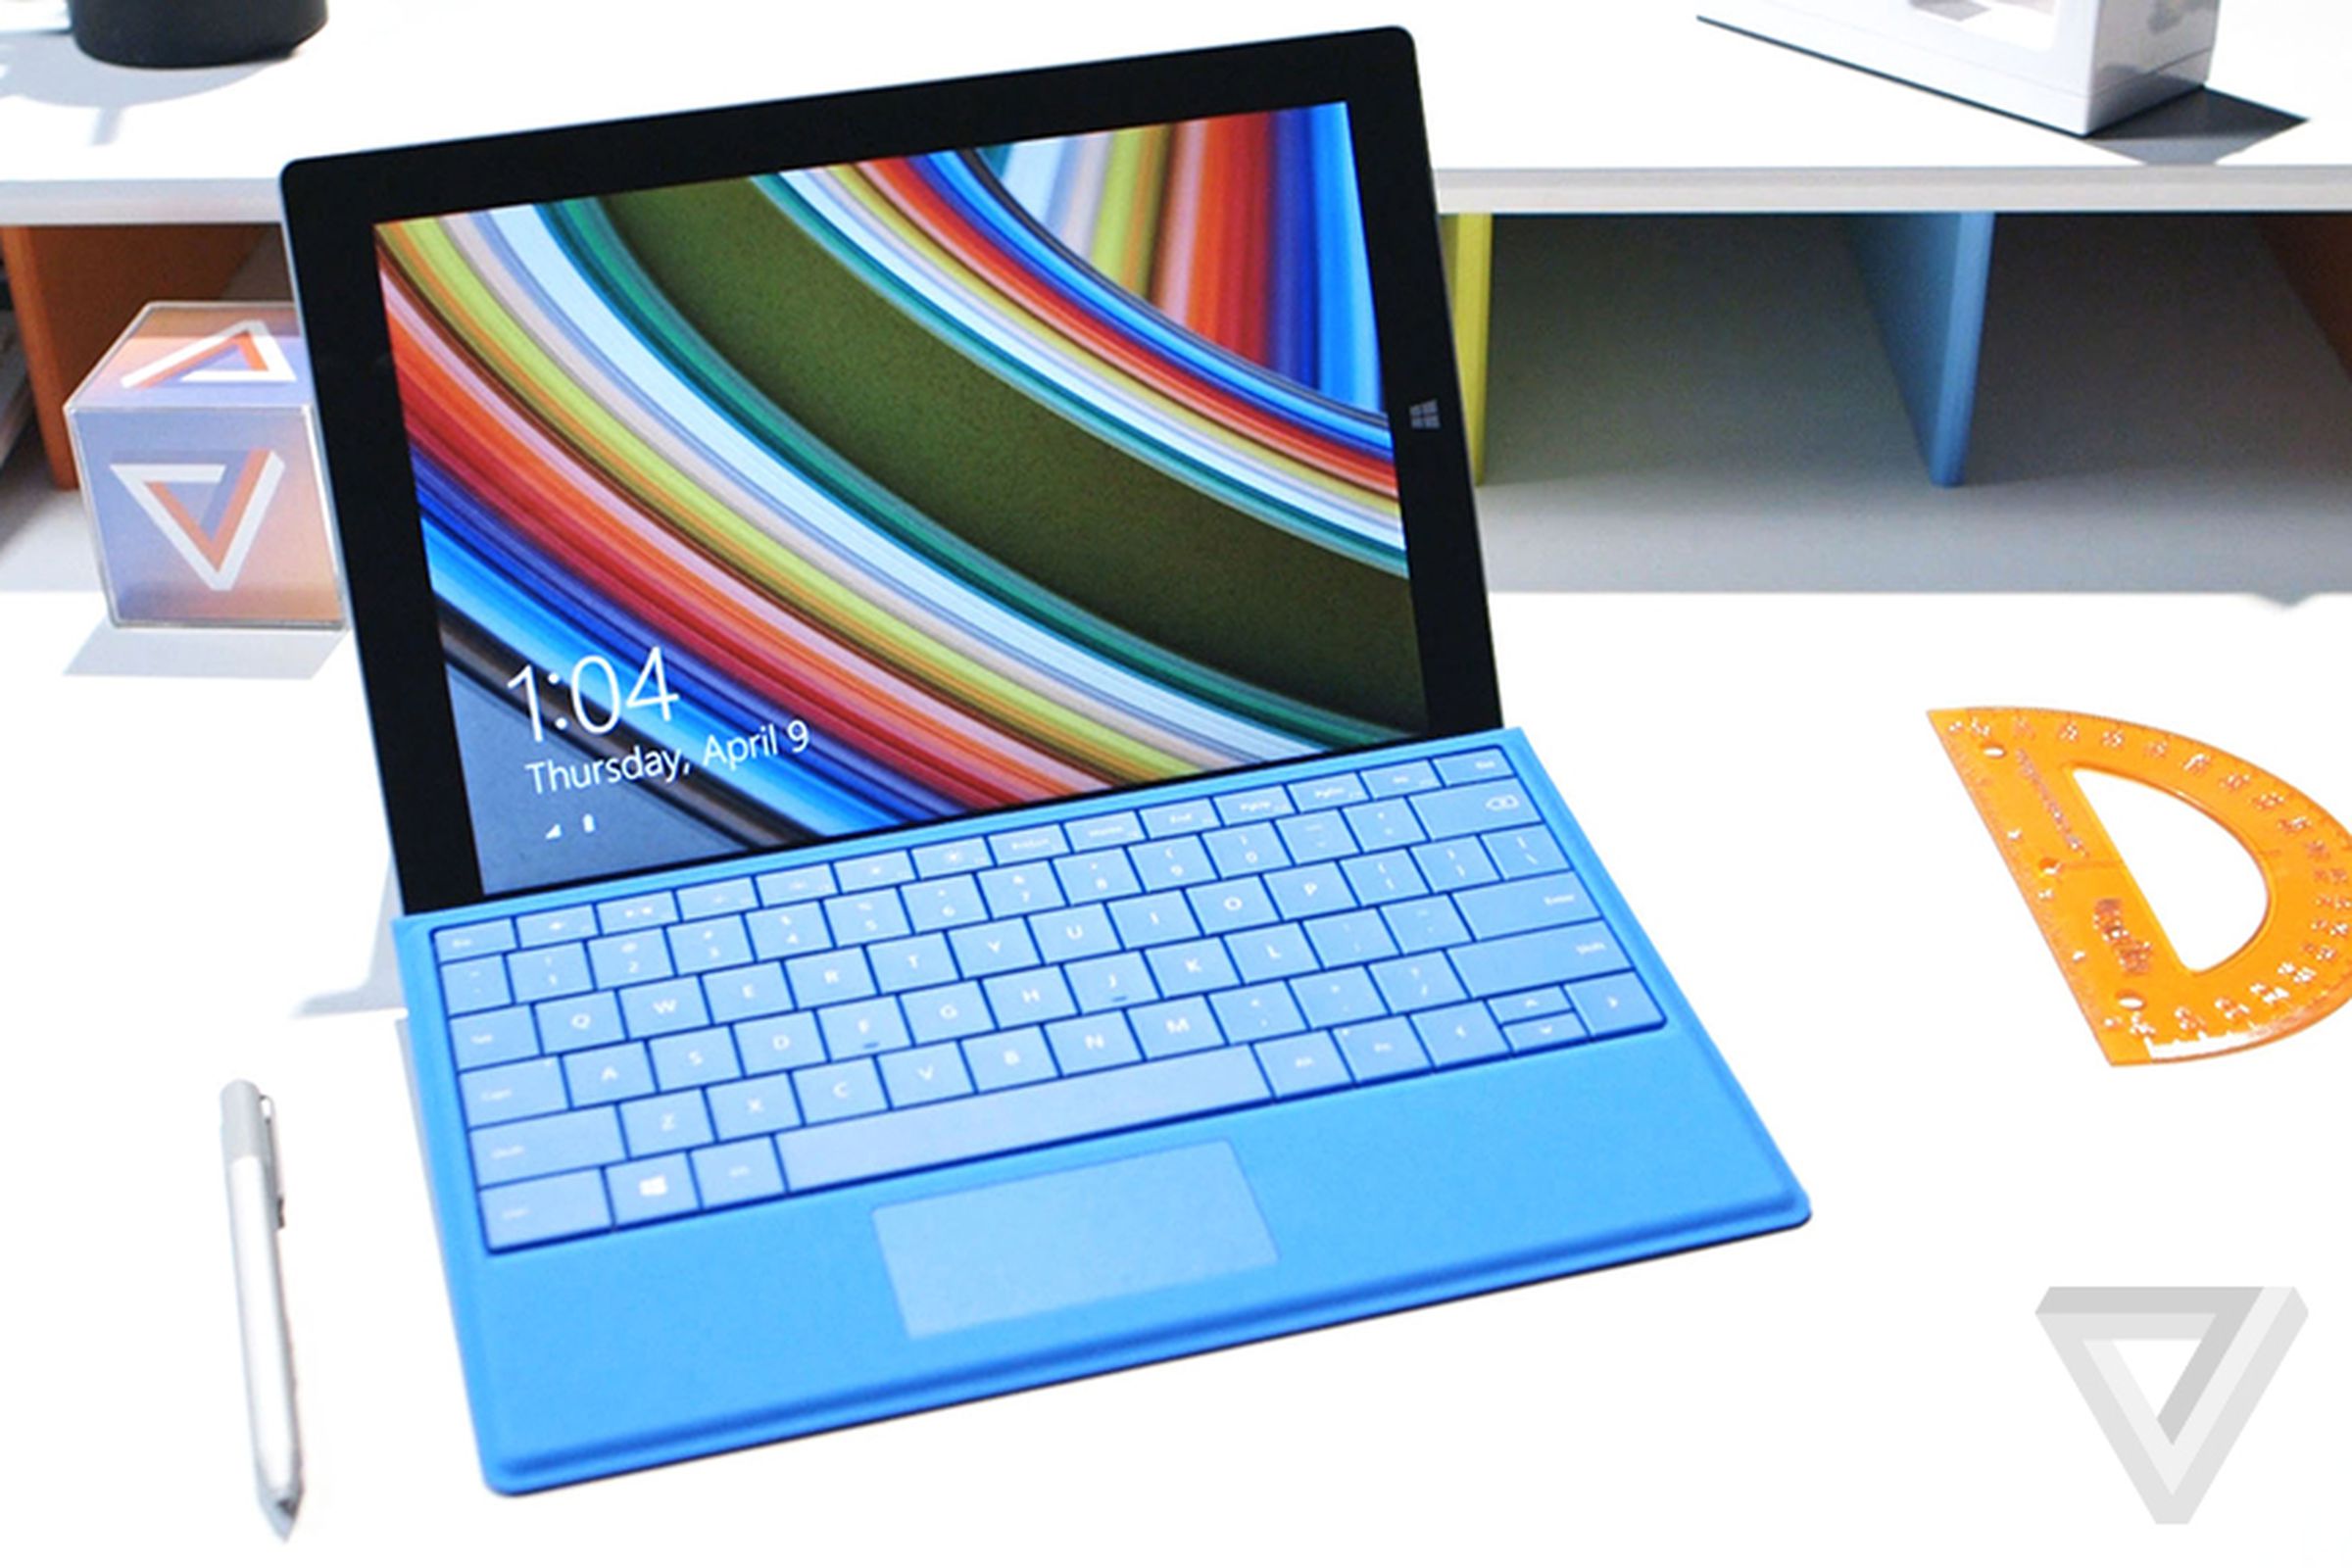 Surface 3 stock